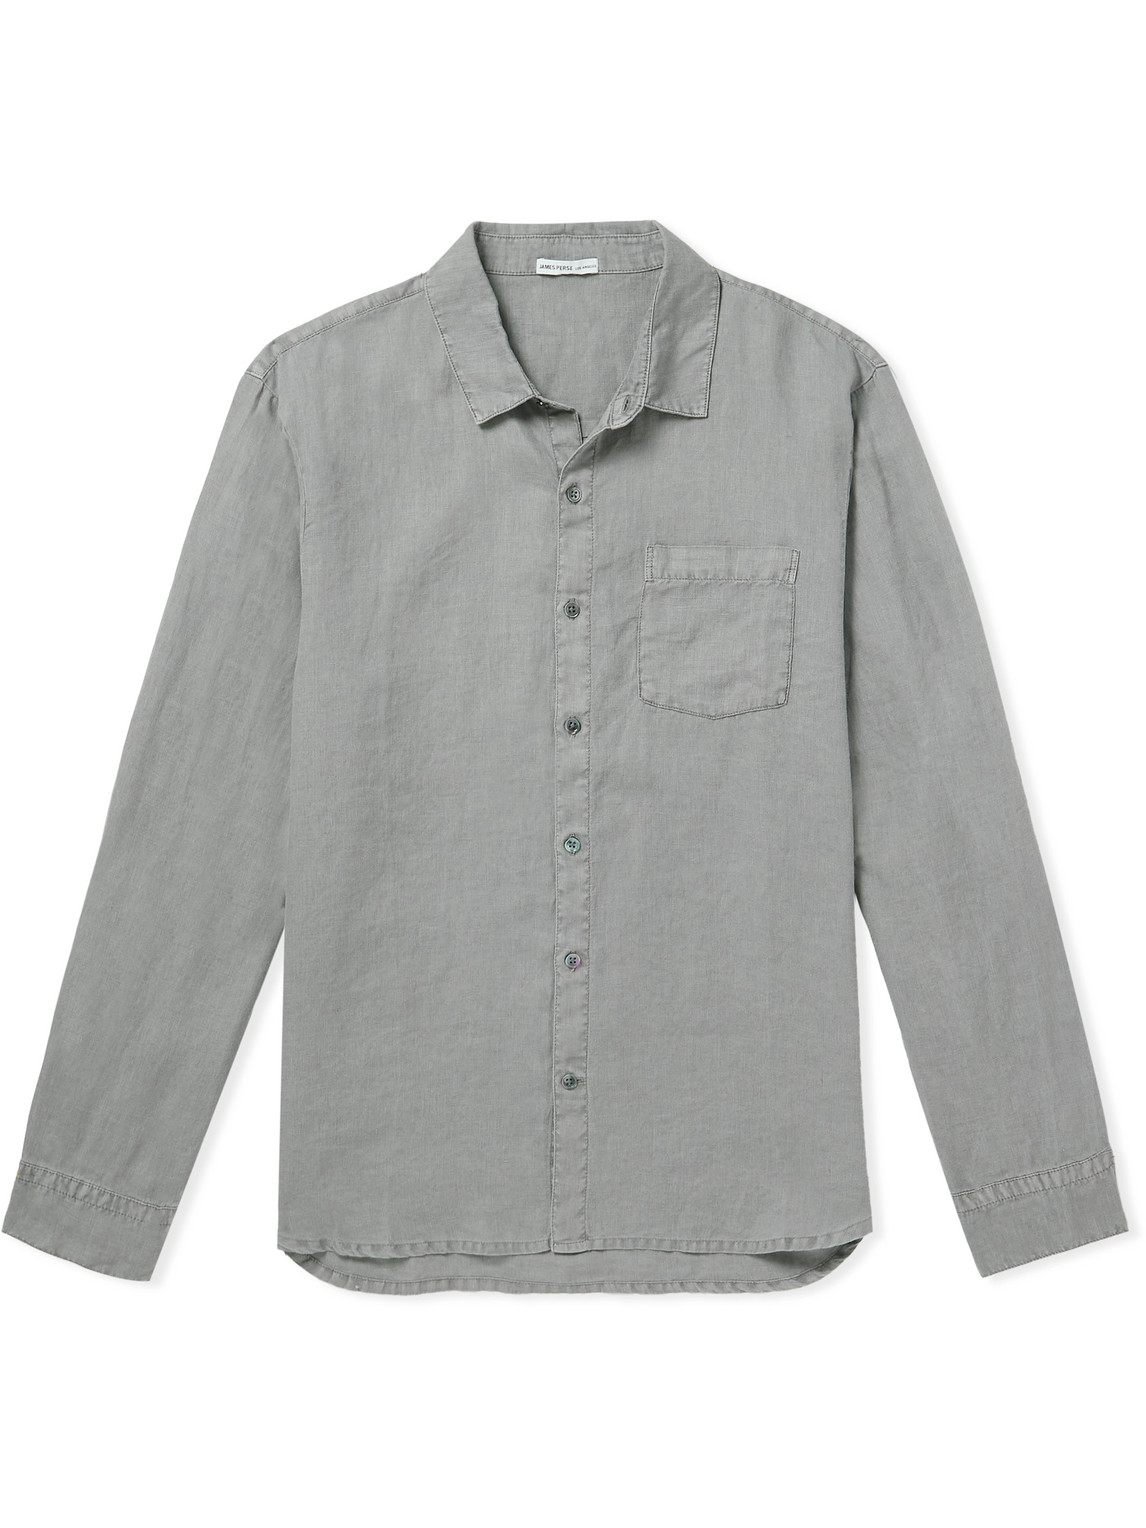 James Perse Garment-dyed Linen Shirt In Gray